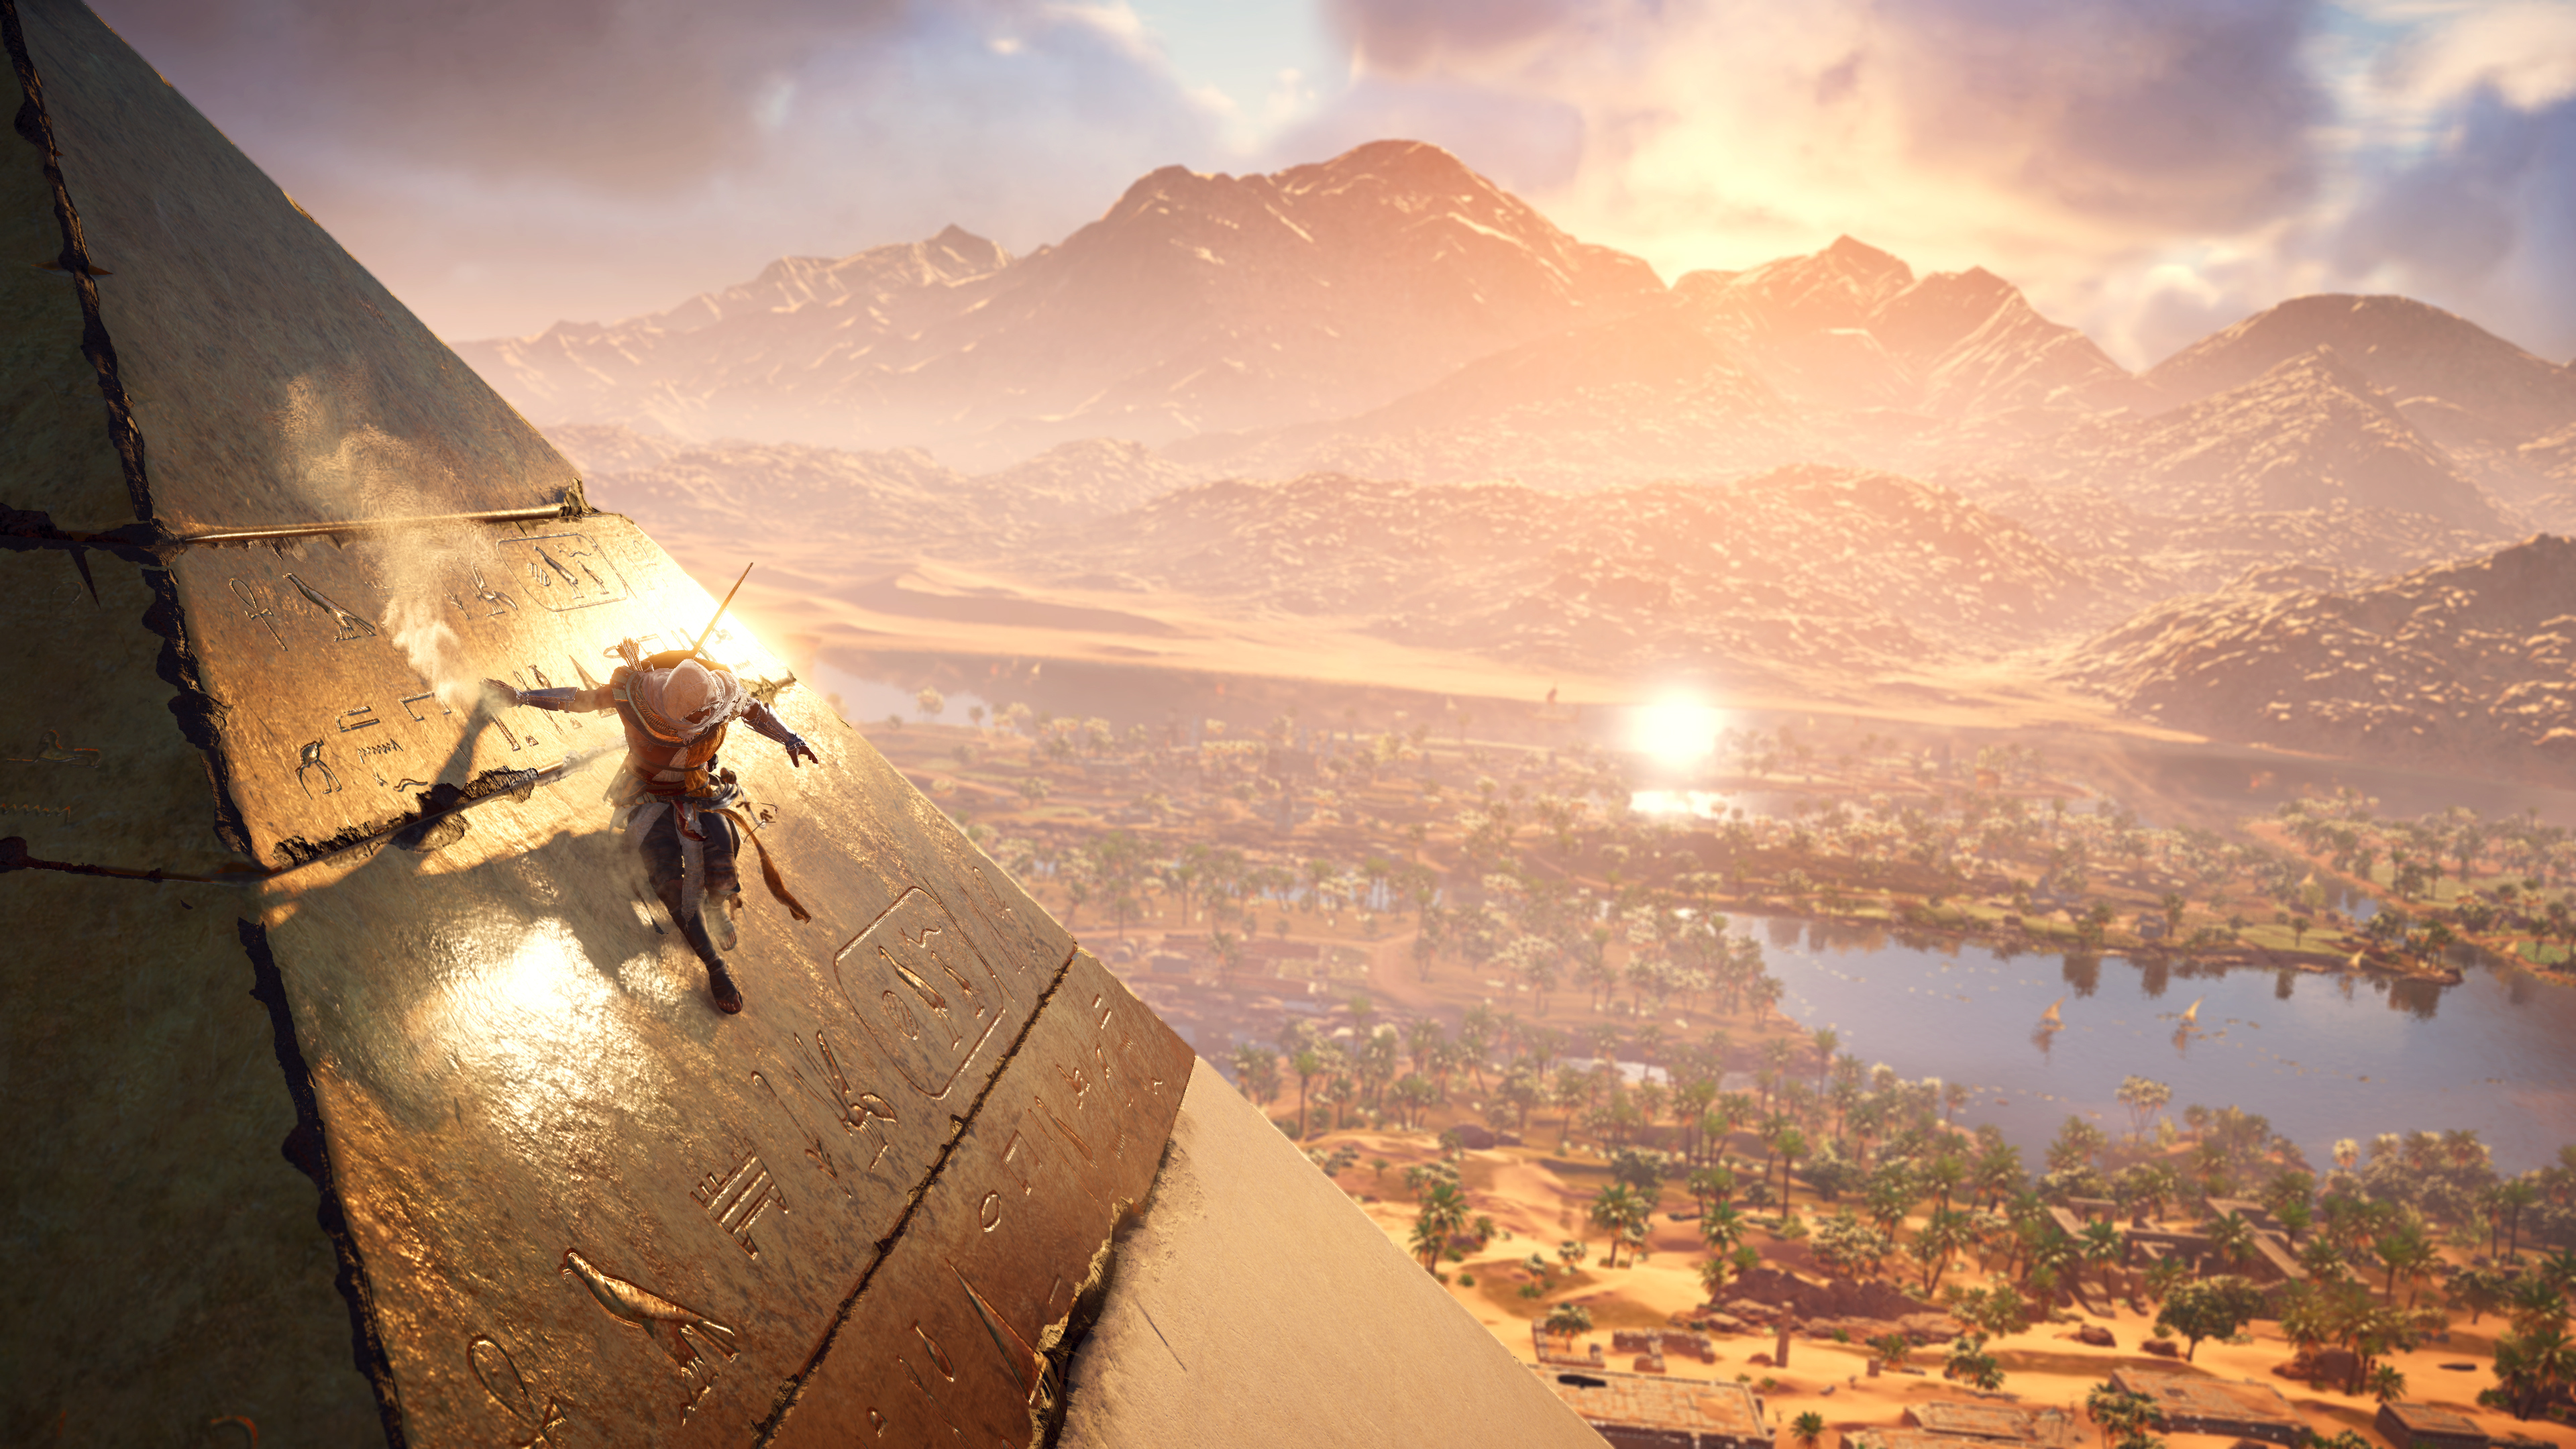 Assassin's Creed Origins 4K Screenshots and Concept Art Leaked